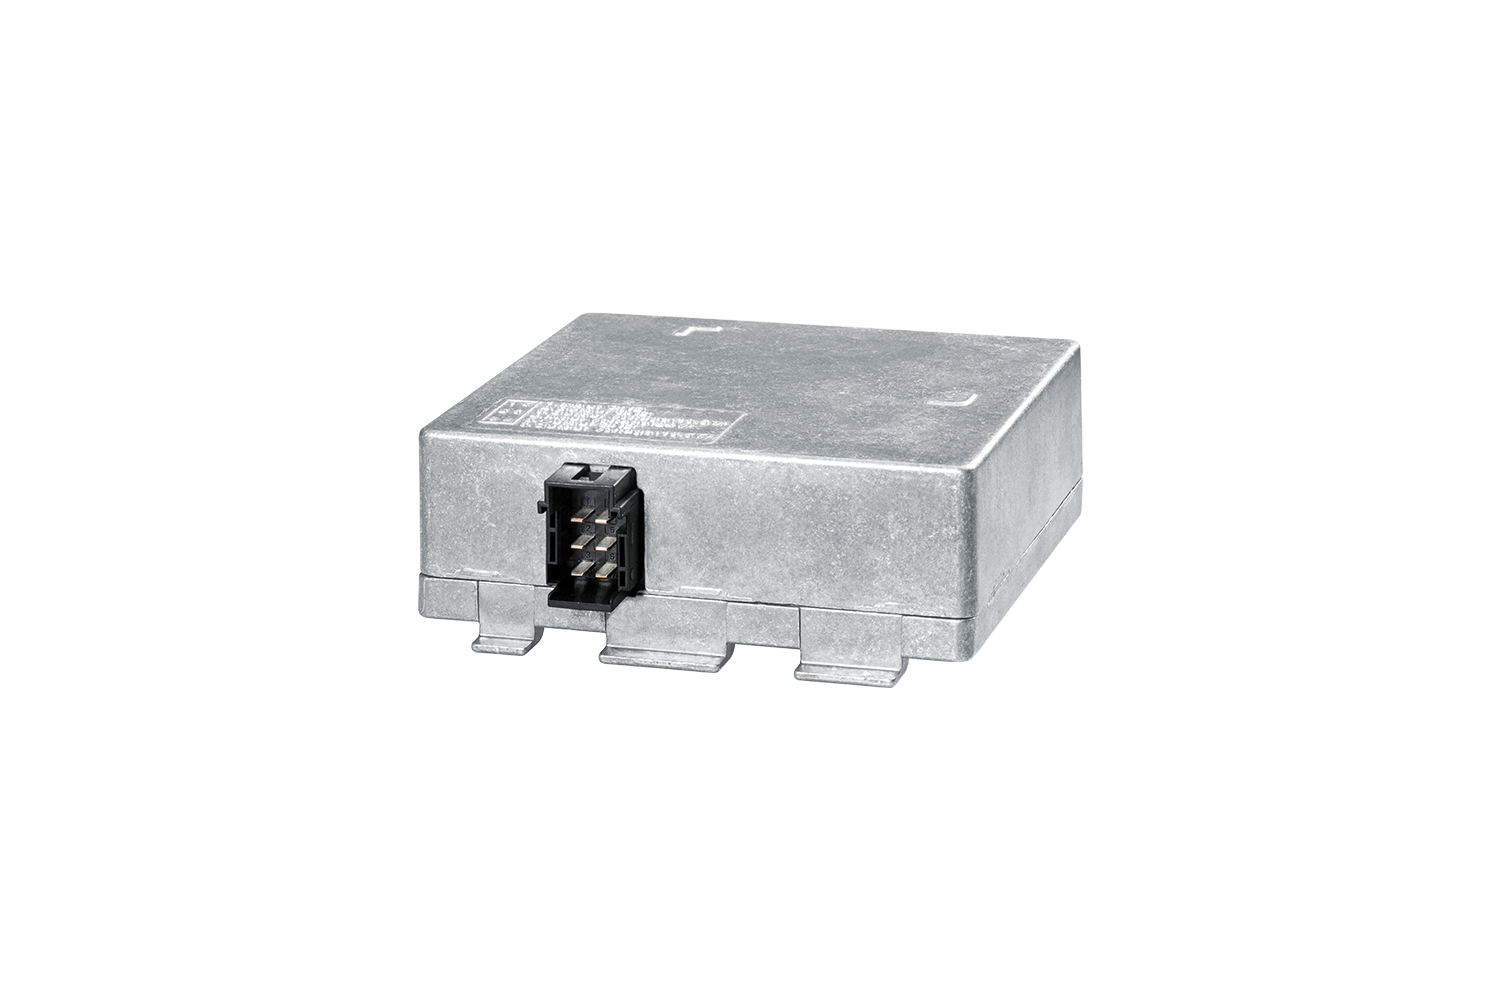 DC/DC voltage converter 24 V/12 V, energy management products from Hella offered by Patlon